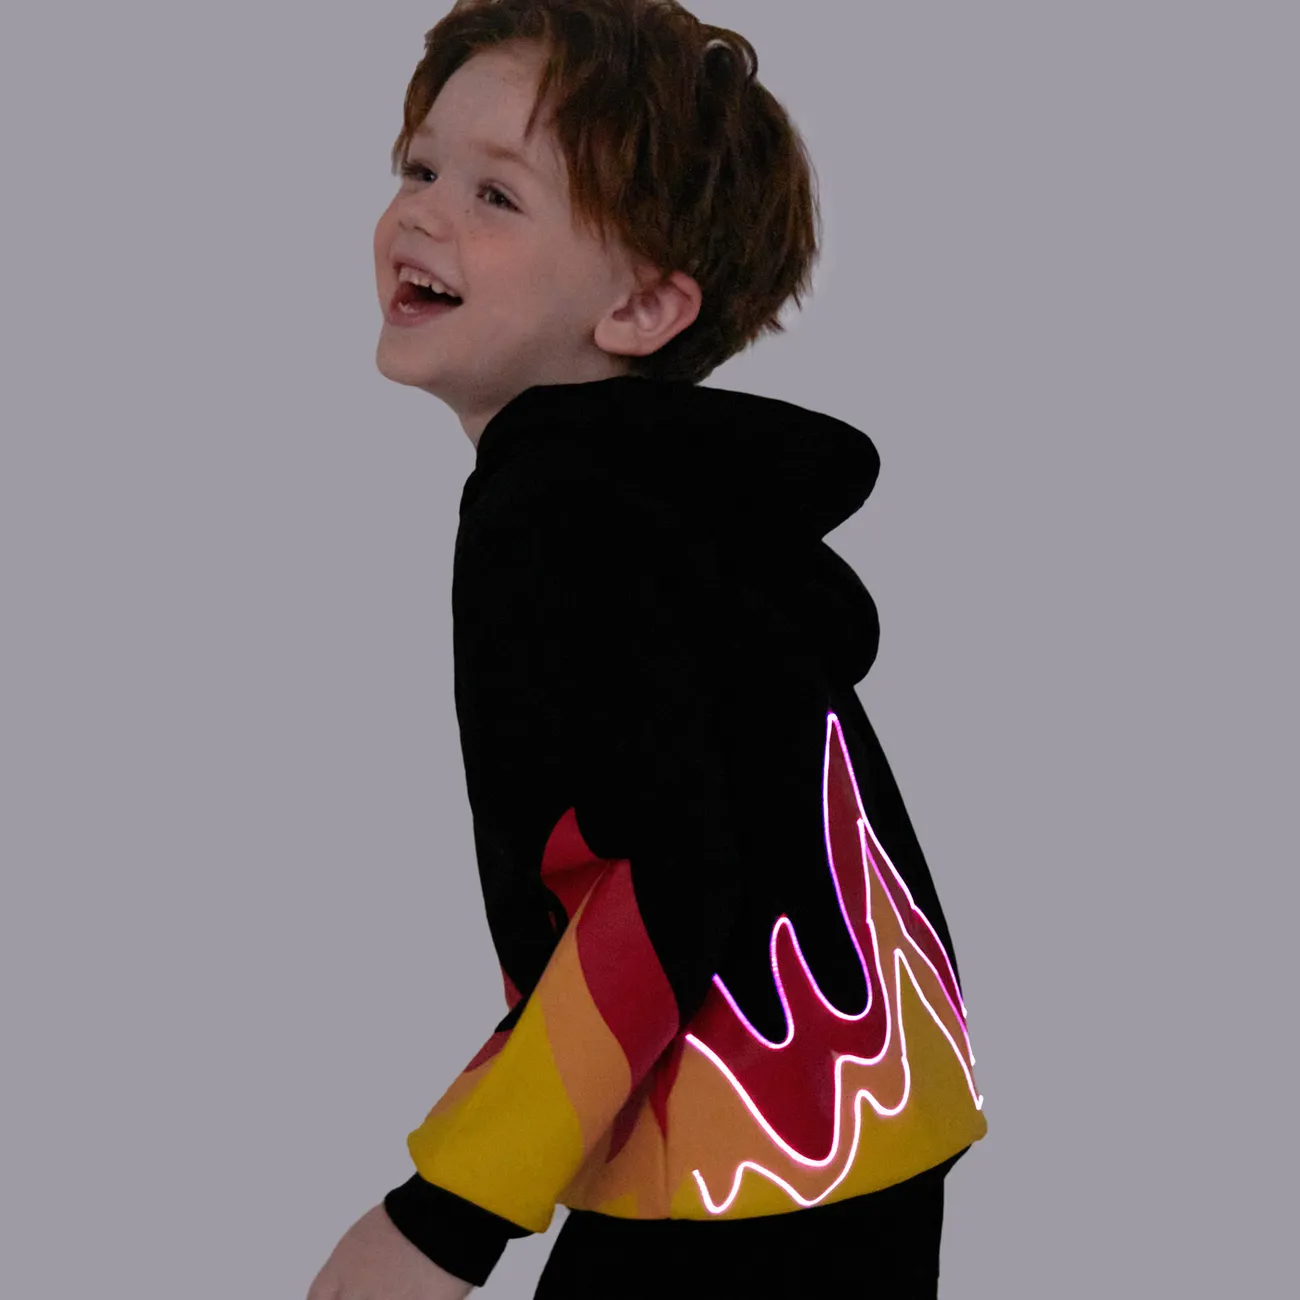 Go-Glow Illuminating Jacket with Light Up Flames Including Controller (Built-In Battery) Black big image 1